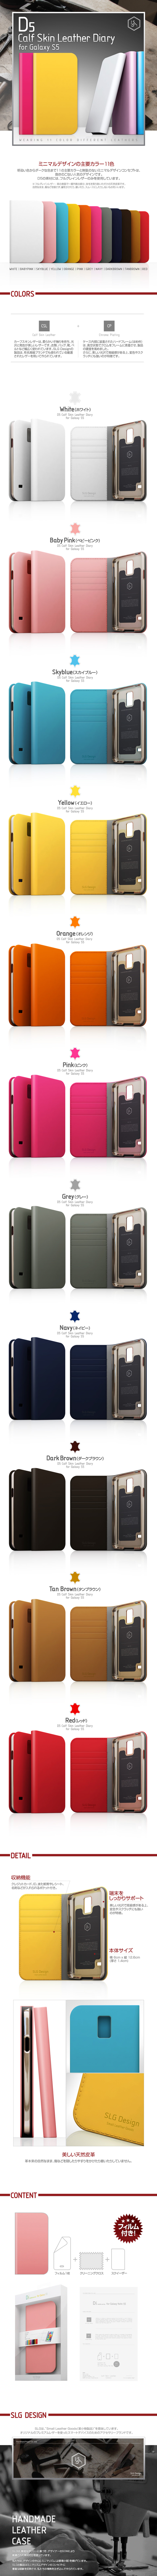 GalaxyS5ケース D5 Calf Skin Leather Diary